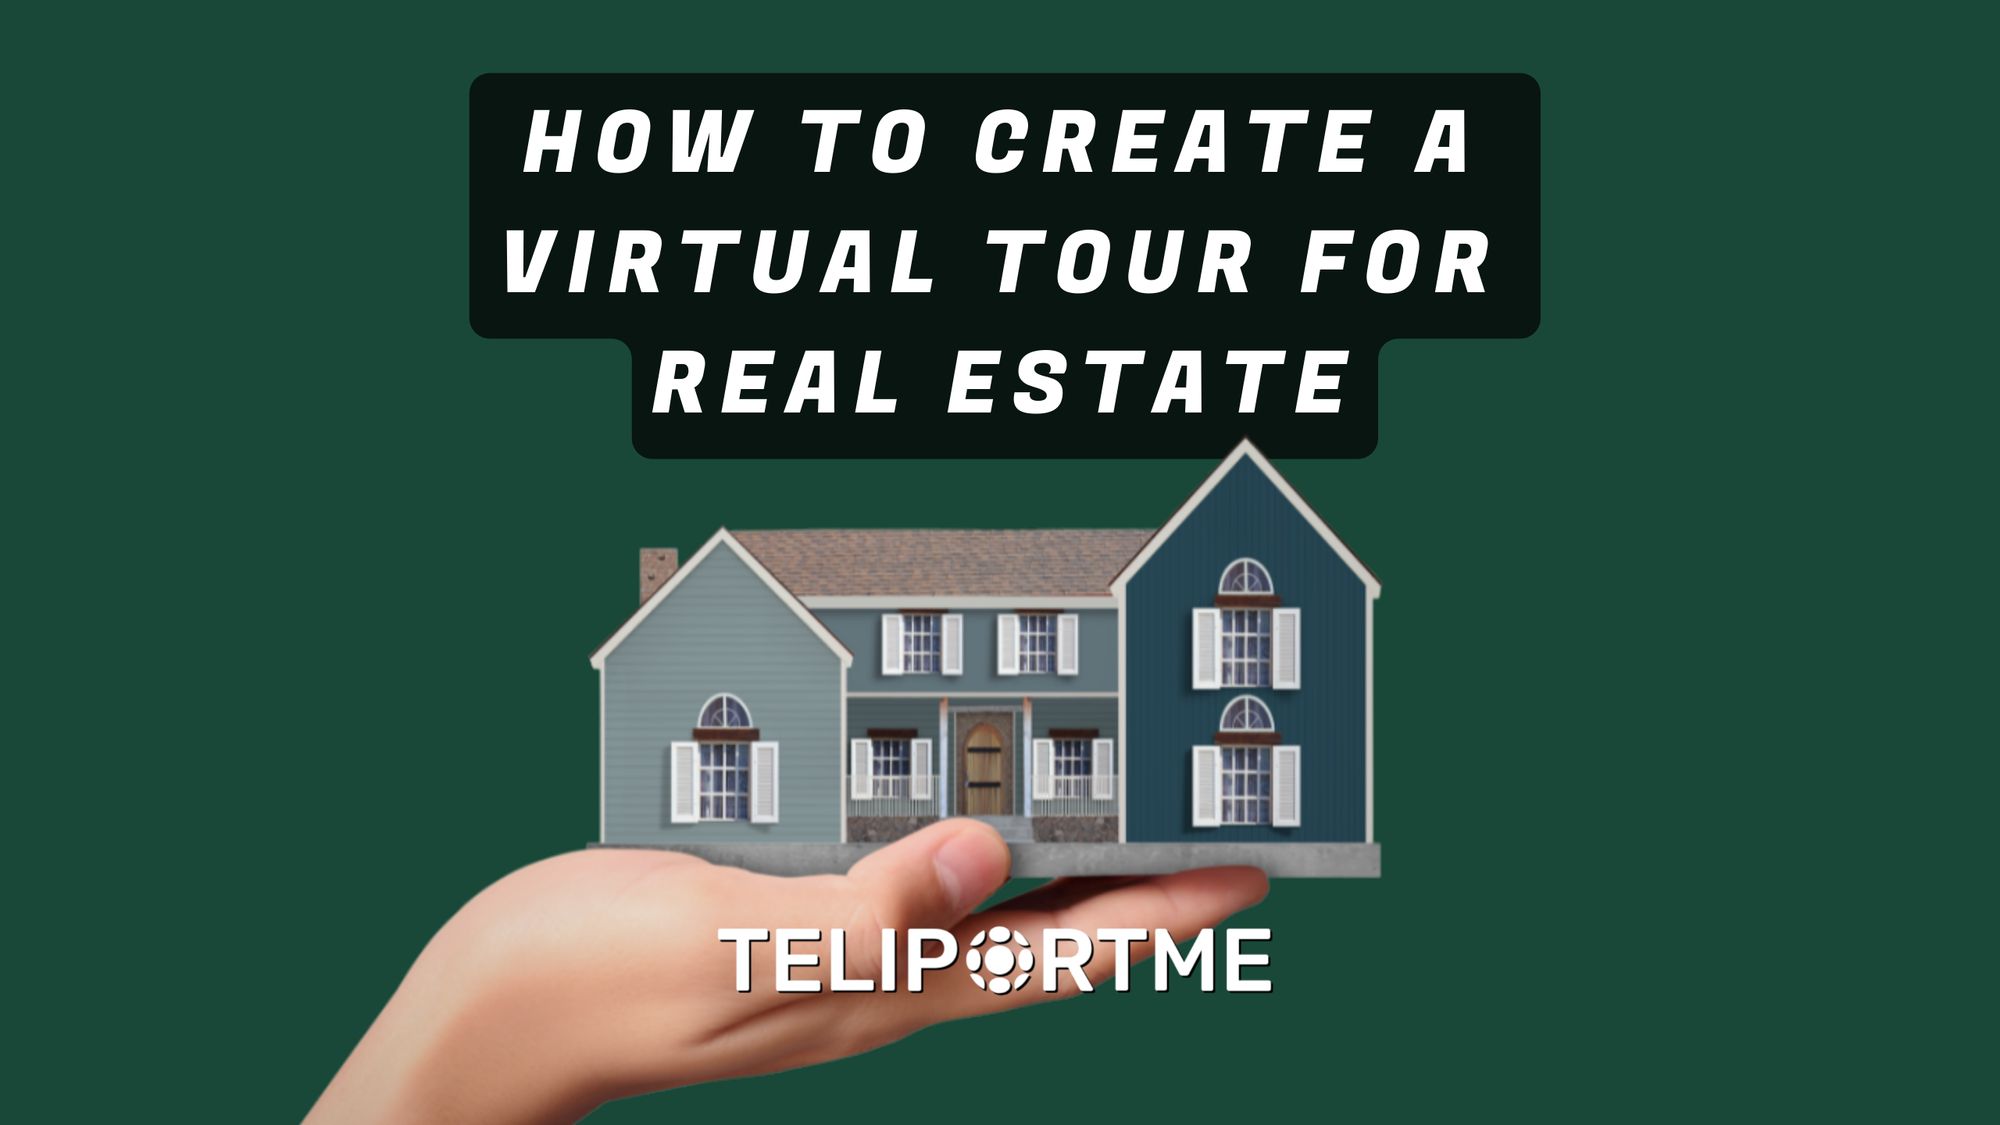 How to Create a Virtual Tour for Real Estate